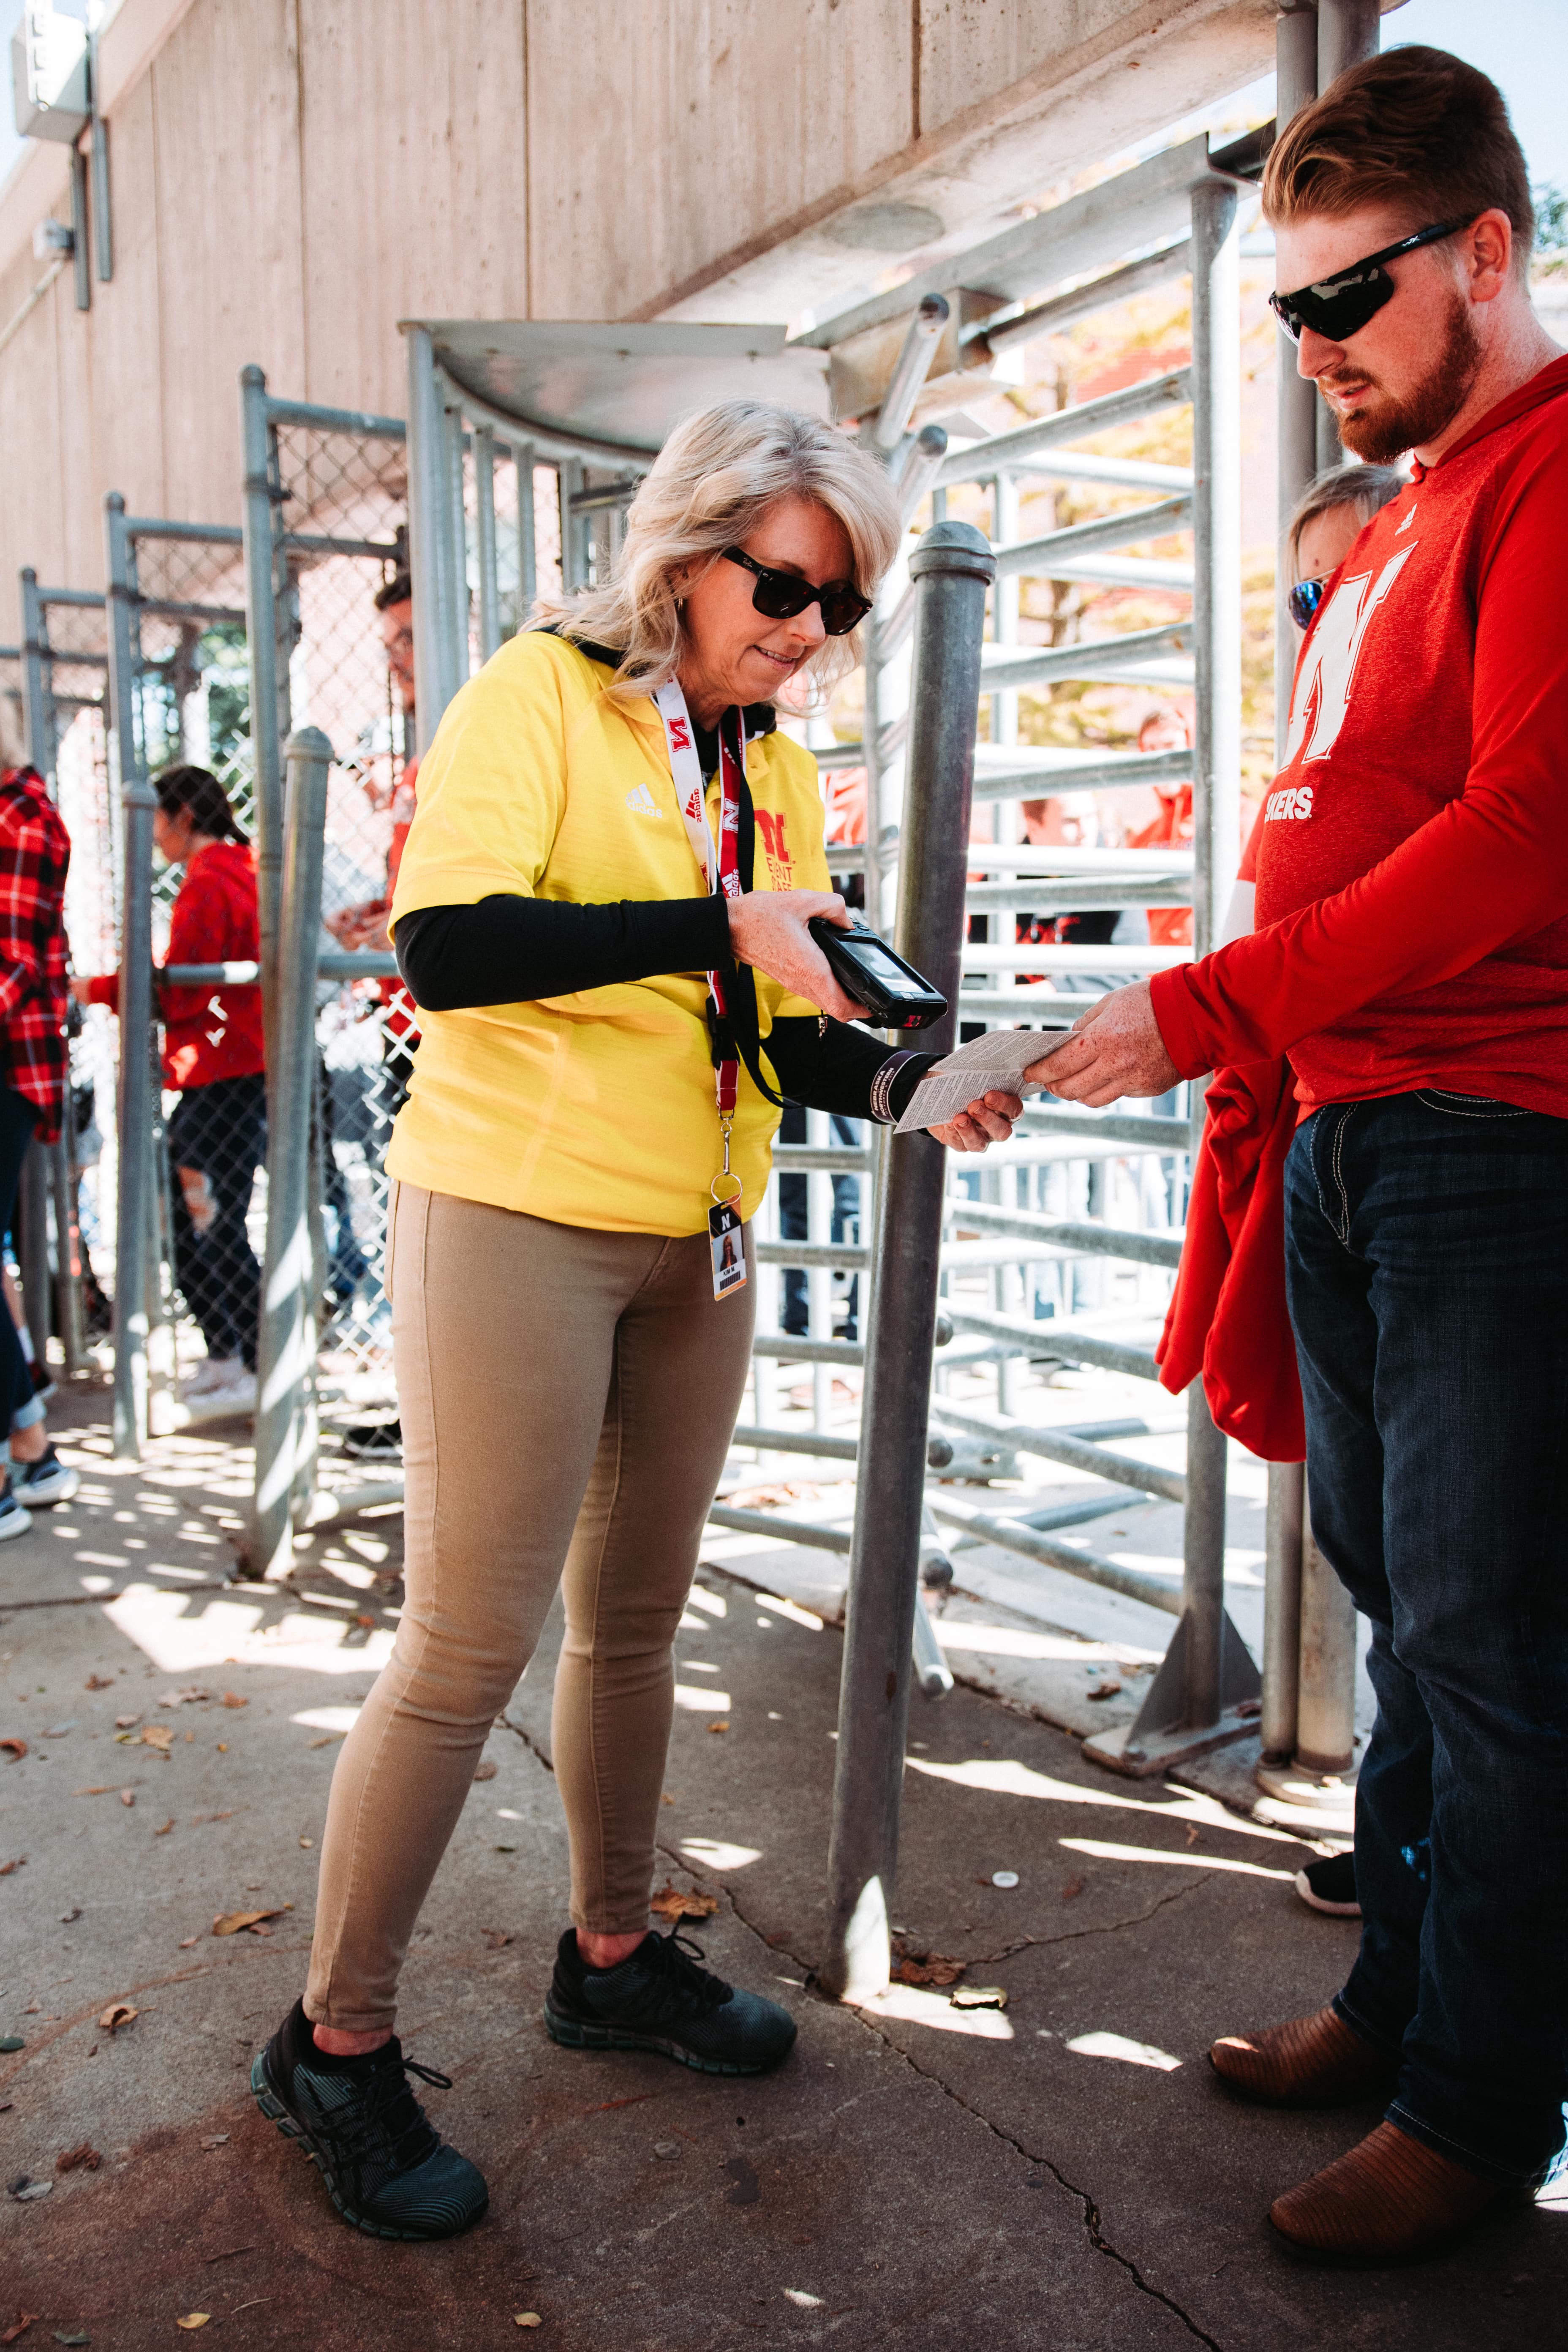 The Nebraska Event Staff is responsible for providing the Ultimate Fan Experience for the greatest fans in the world. The Ultimate Fan Experience is attained through diligent security, enforcement of procedure, courteous fan interactions, an inviting mann